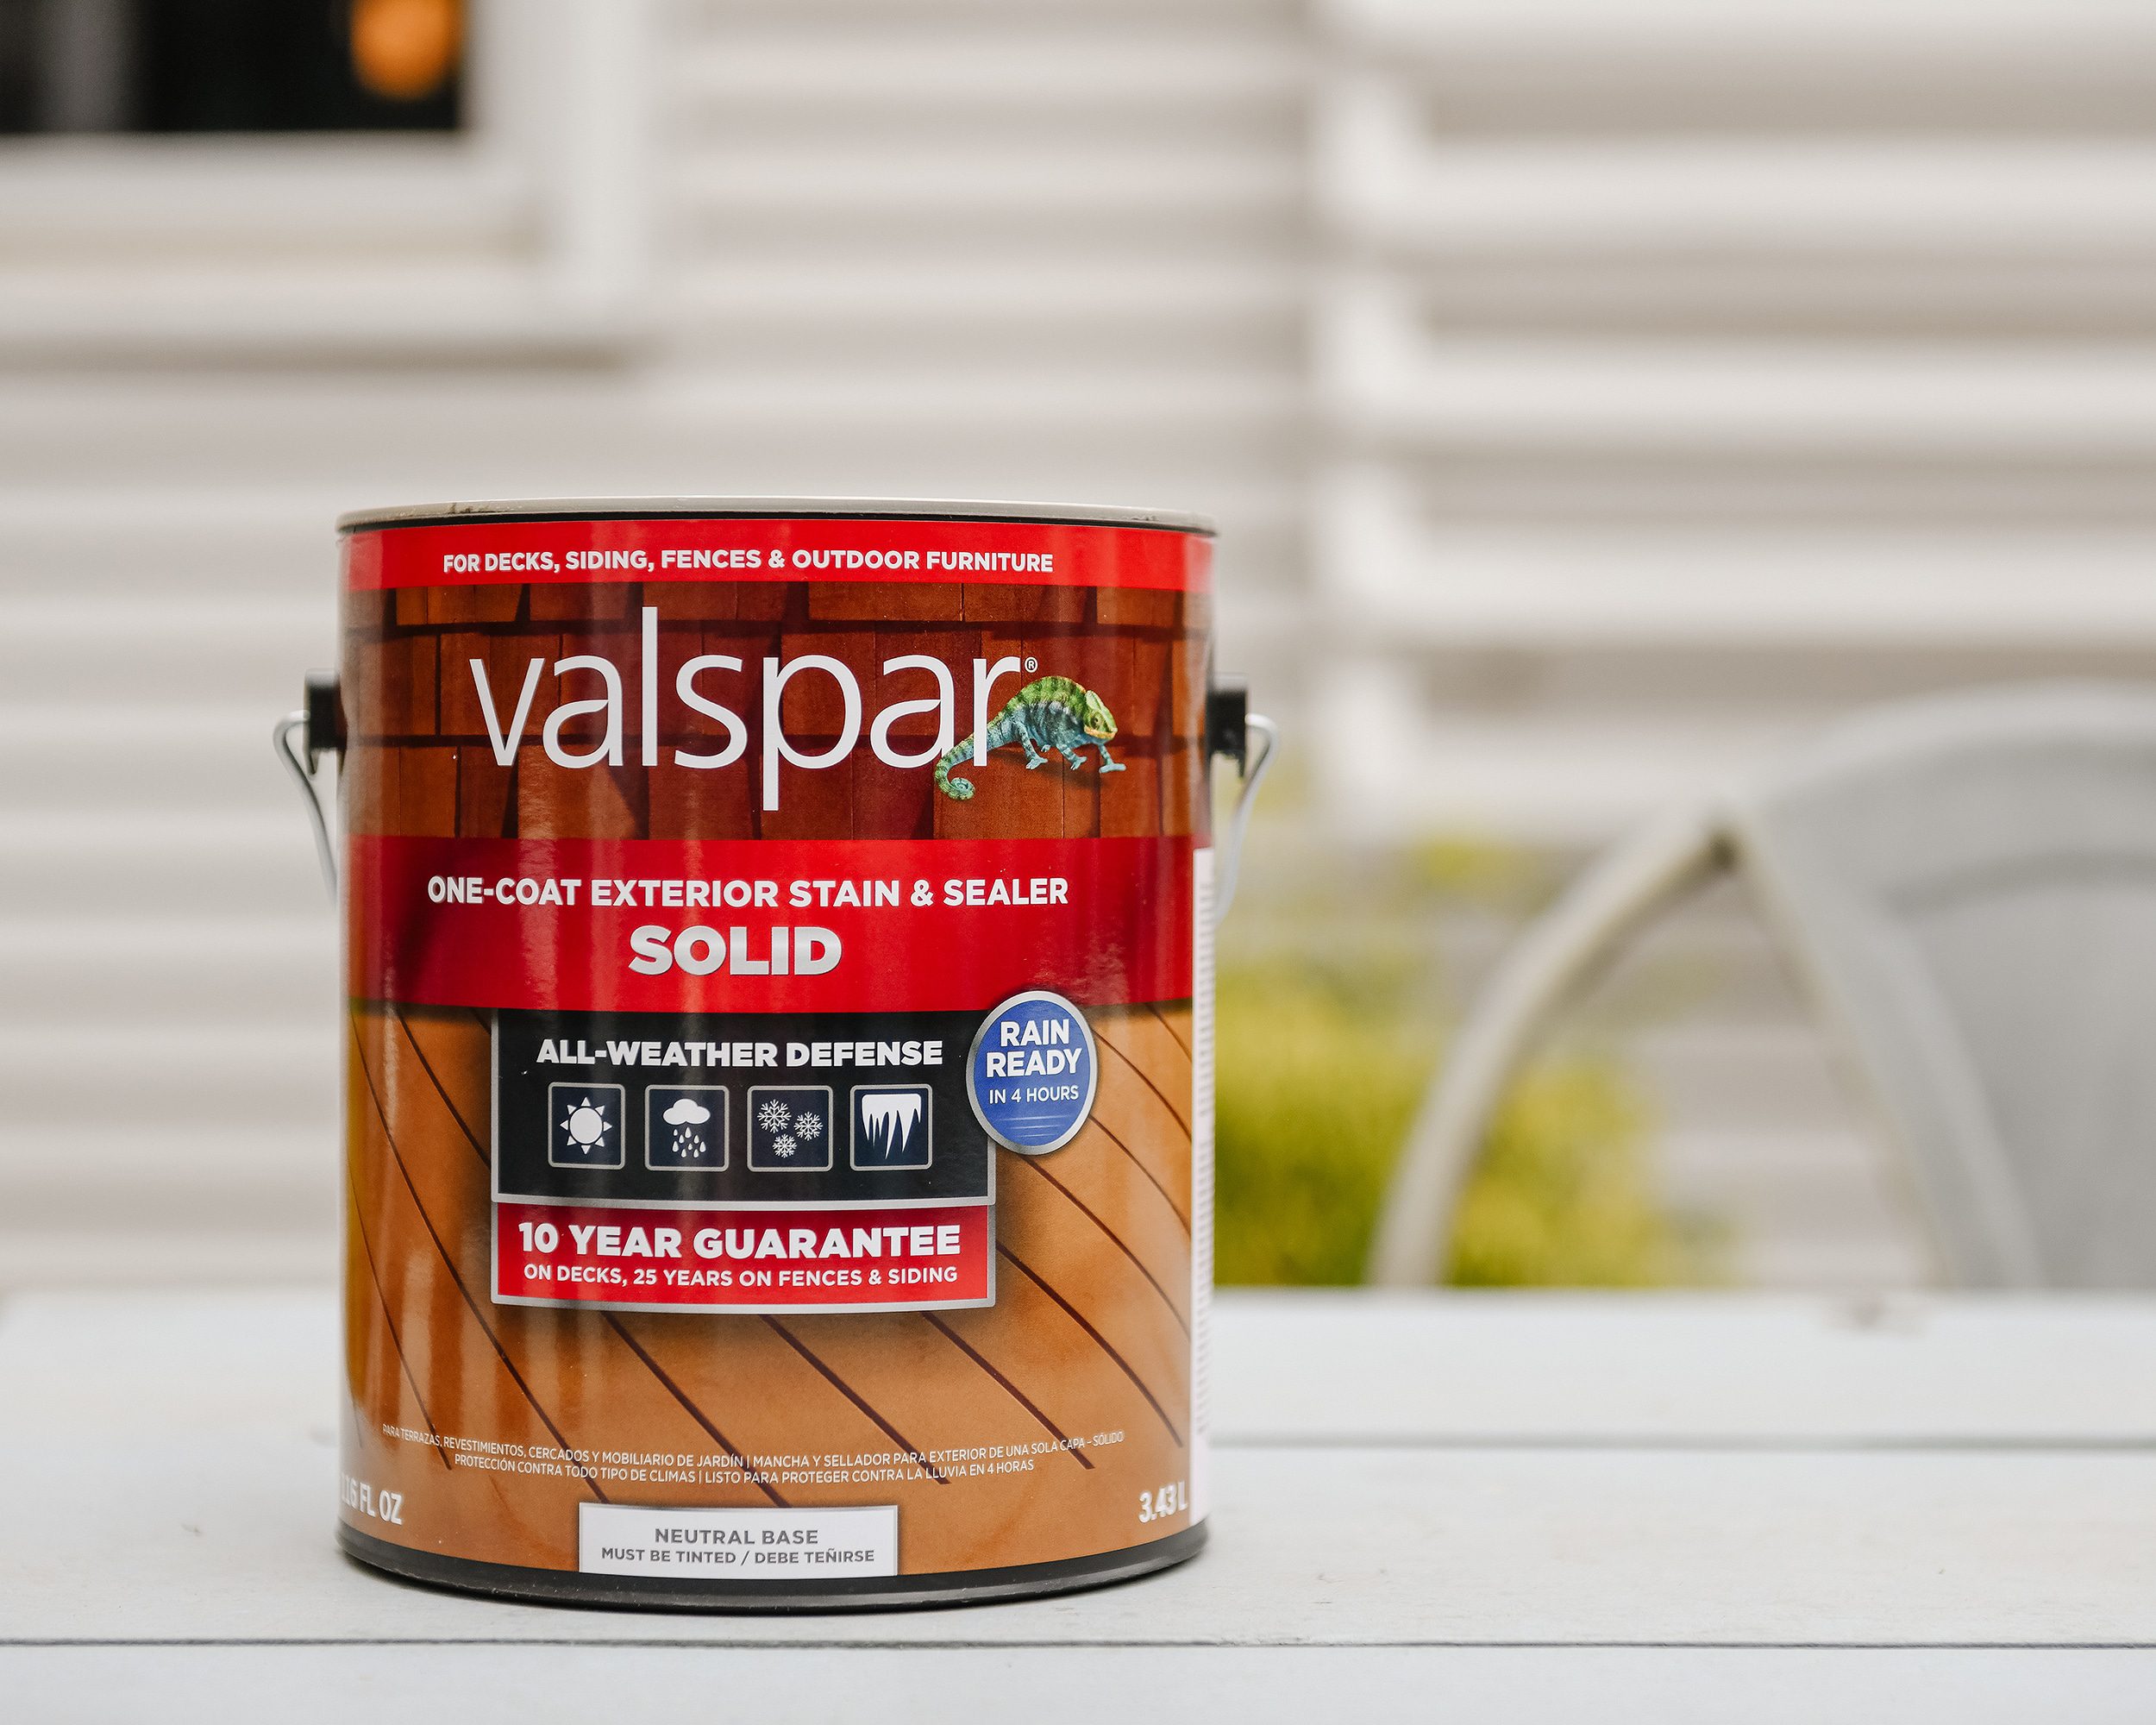 We used Valspar one-coat exterior stain & sealer in solid finish. The color is Darkest Night // via Yellow Brick Home